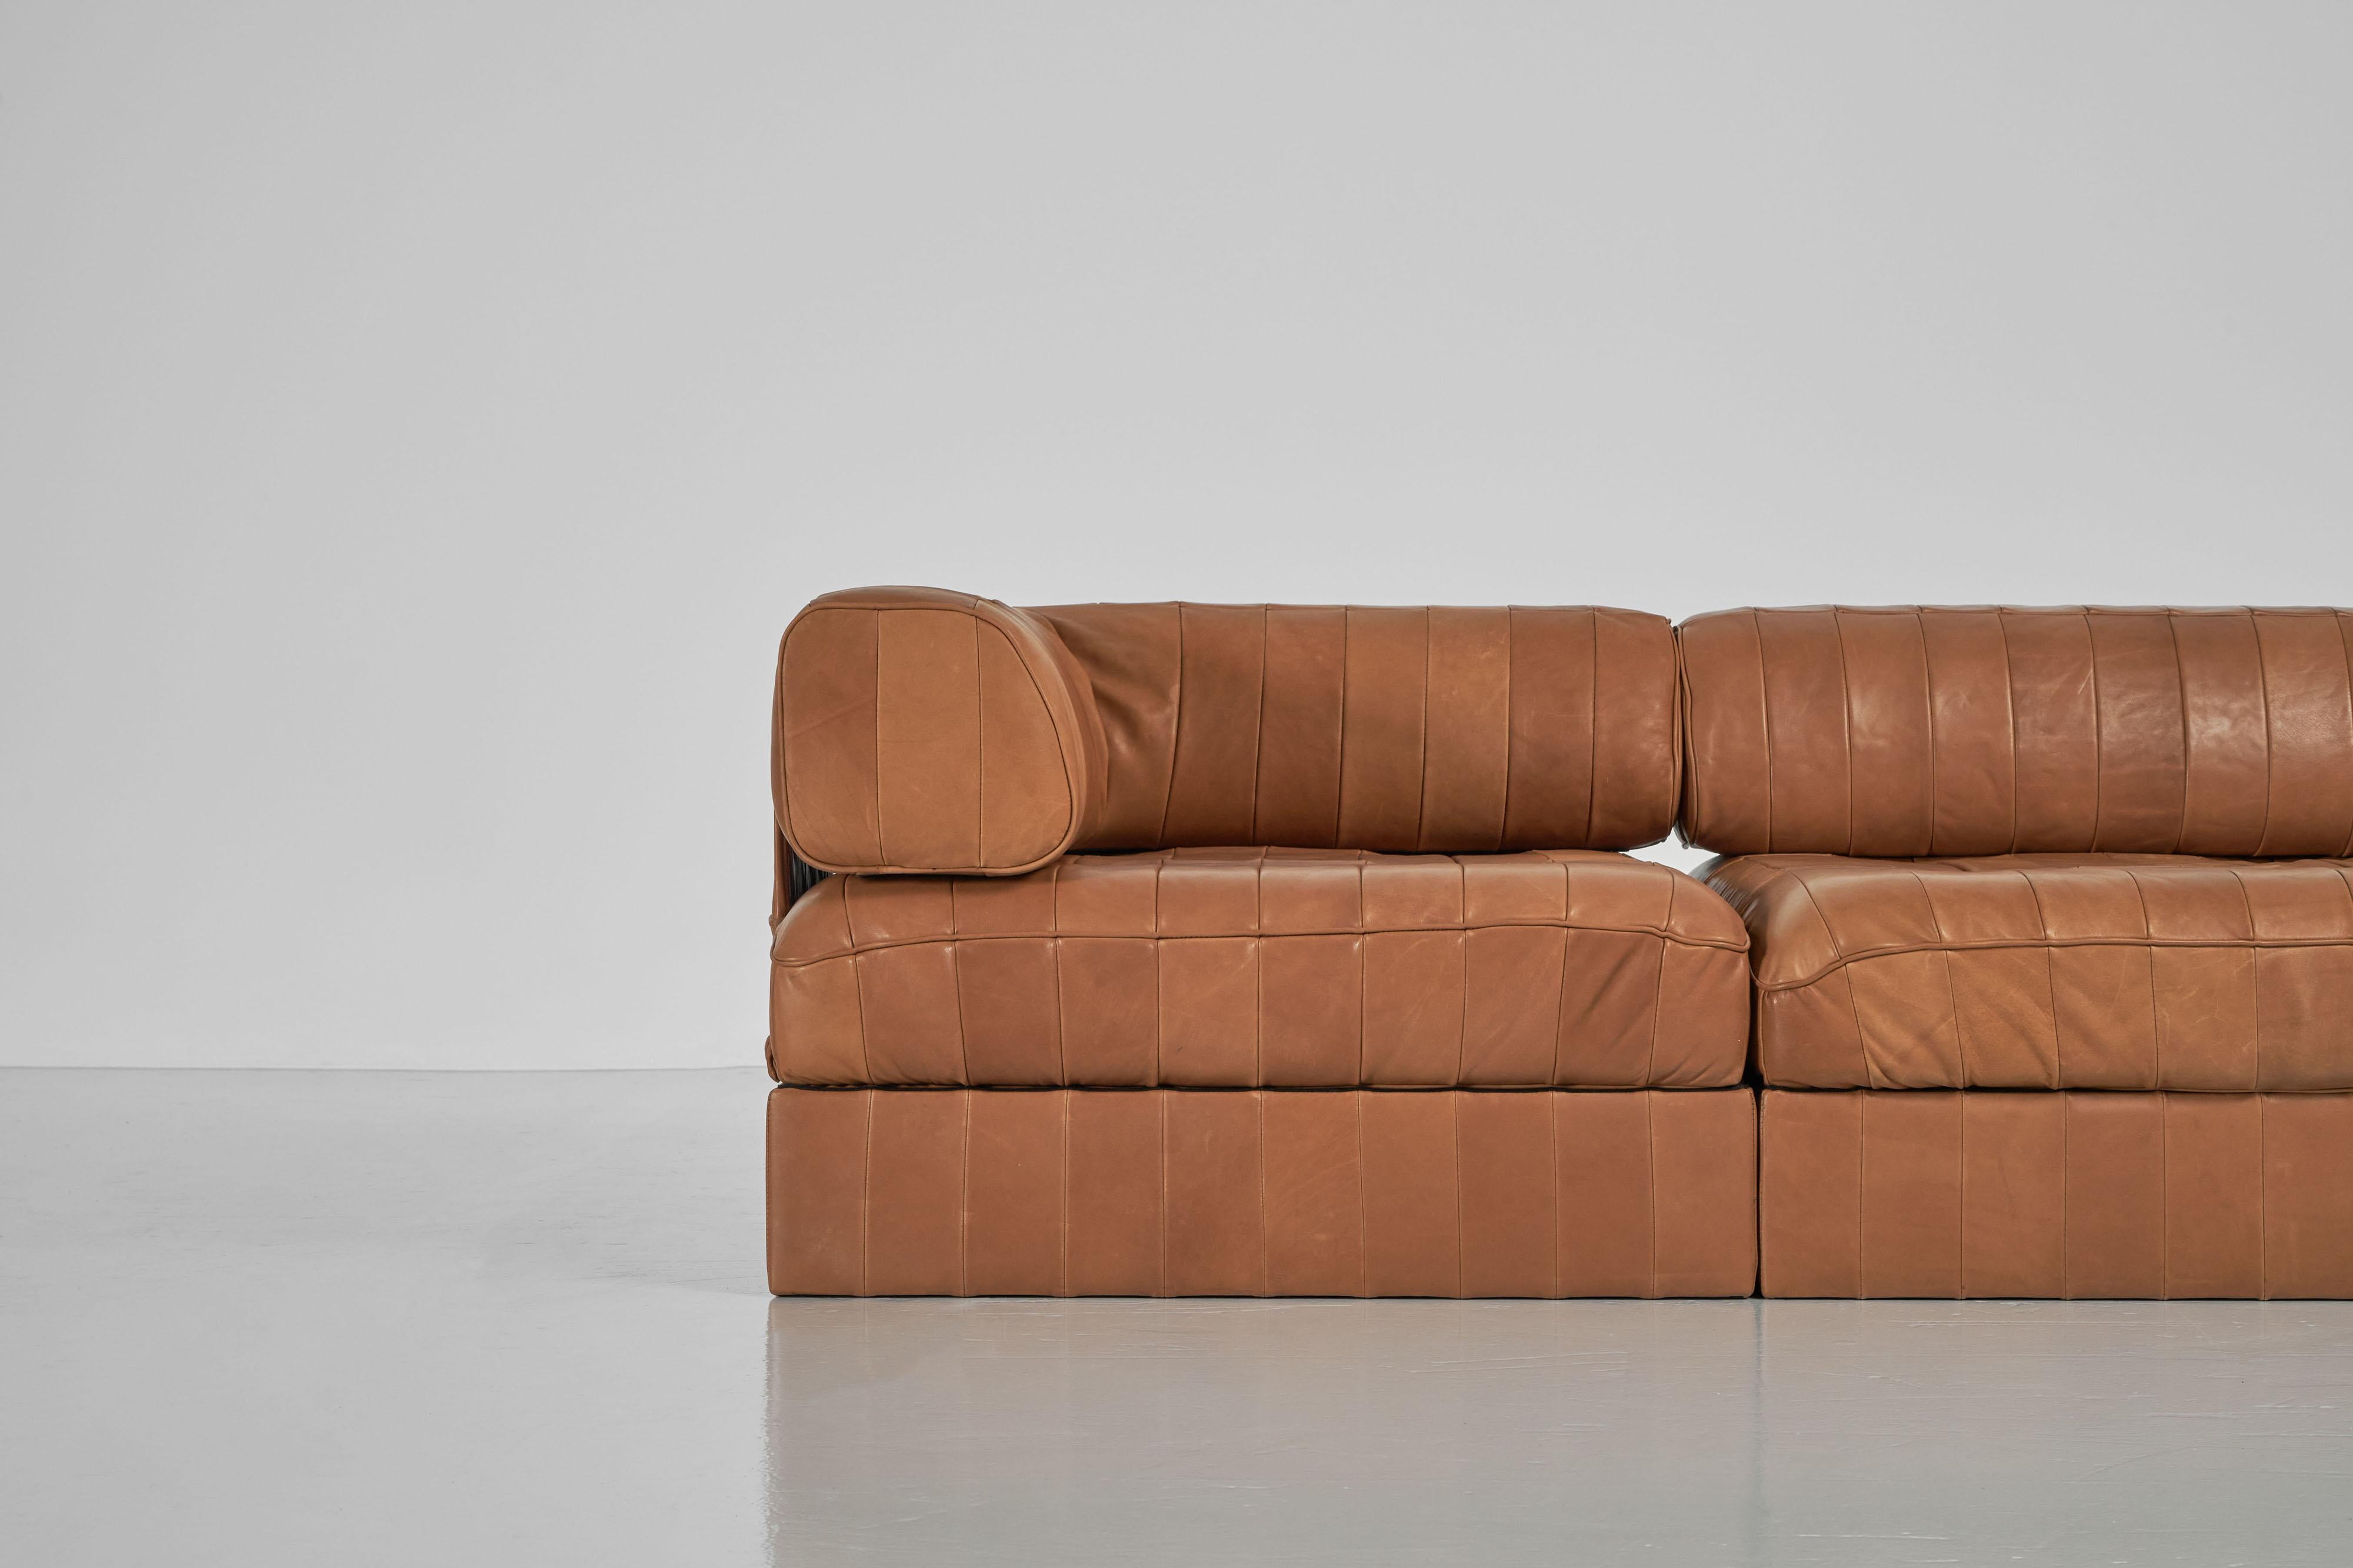 Fantastic leather stitched patchwork sofa model DS88 designed by De Sede team and manufactured by De Sede, Switzerland 1970s. This sofa has beautiful natural tanned leather patchwork, that still looks amazing and classy. Fantastic design by De Sede